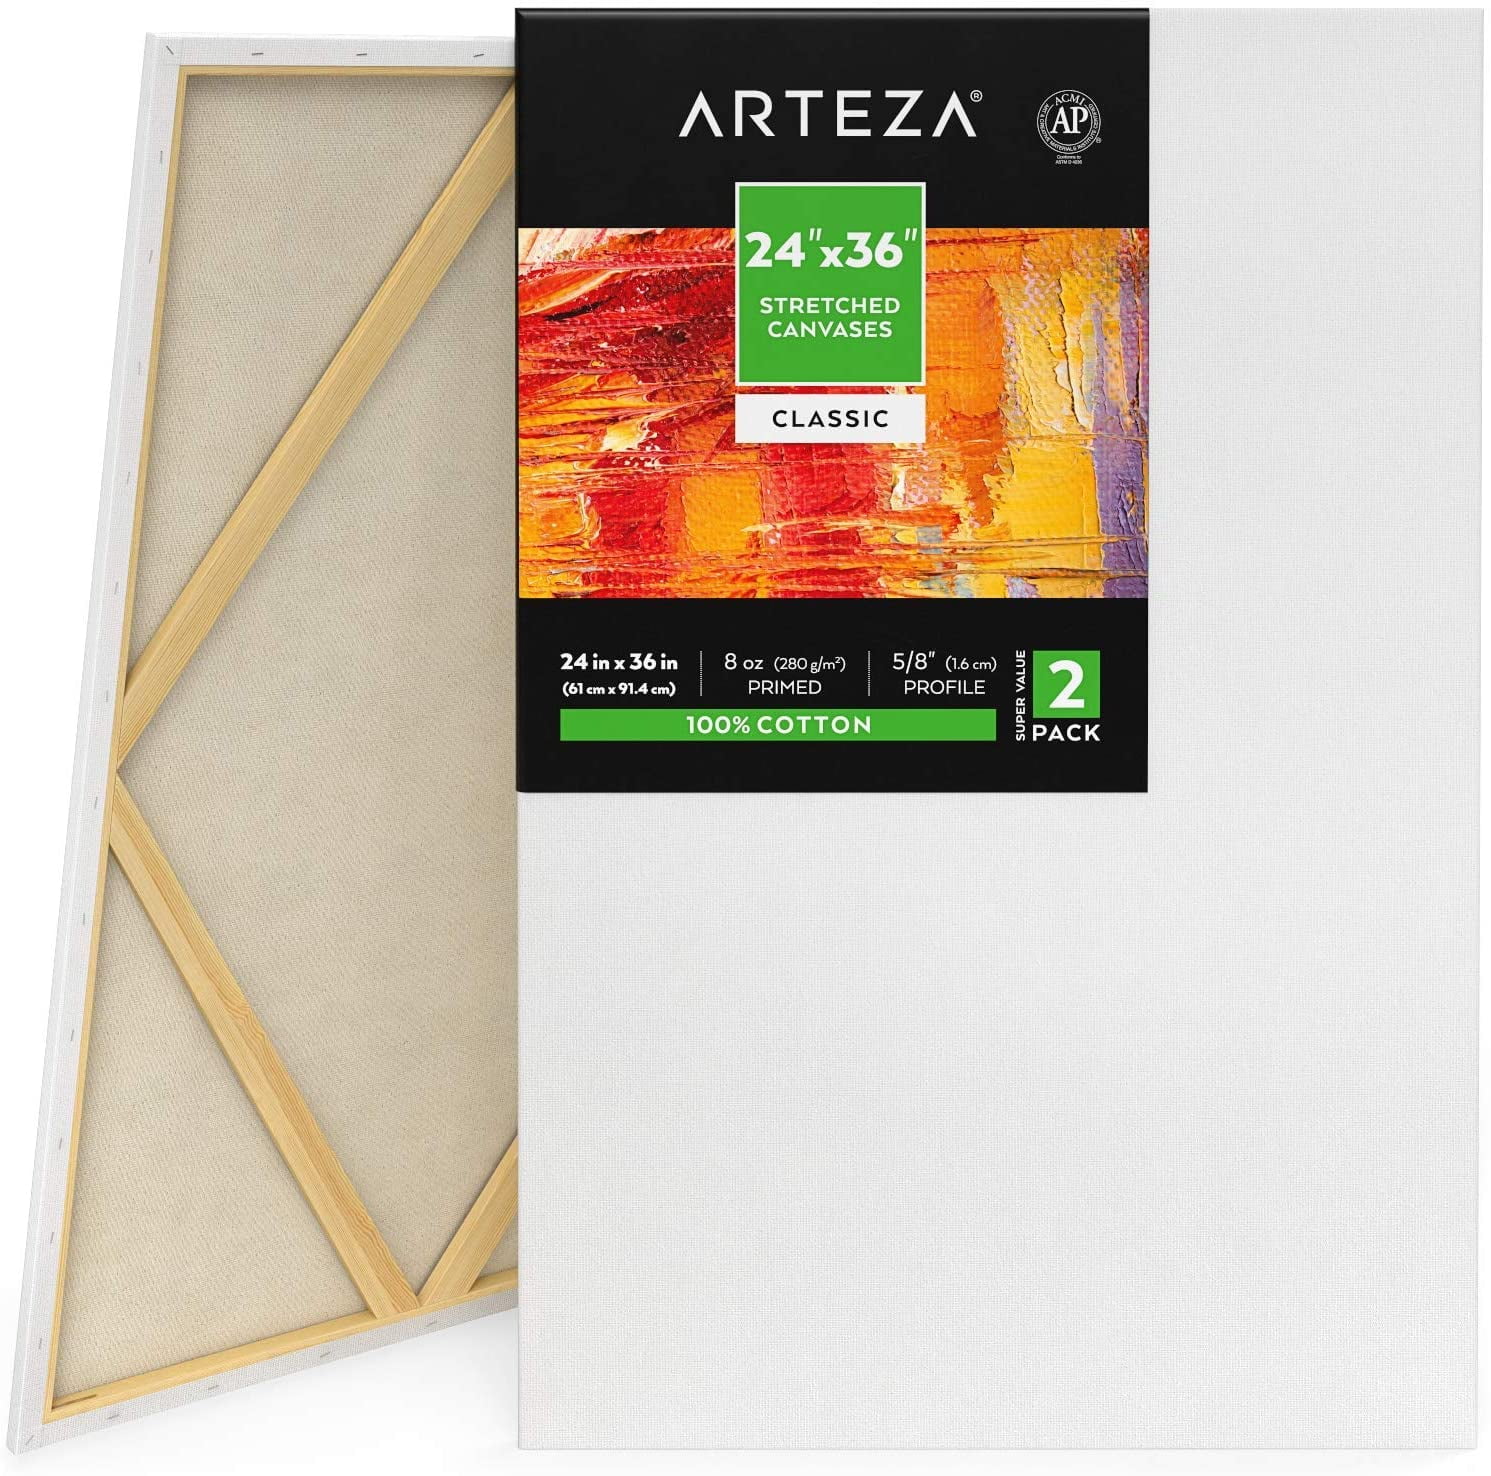 Paint Canvases For Painting,,, Blank White Stretched Canvas Bulk